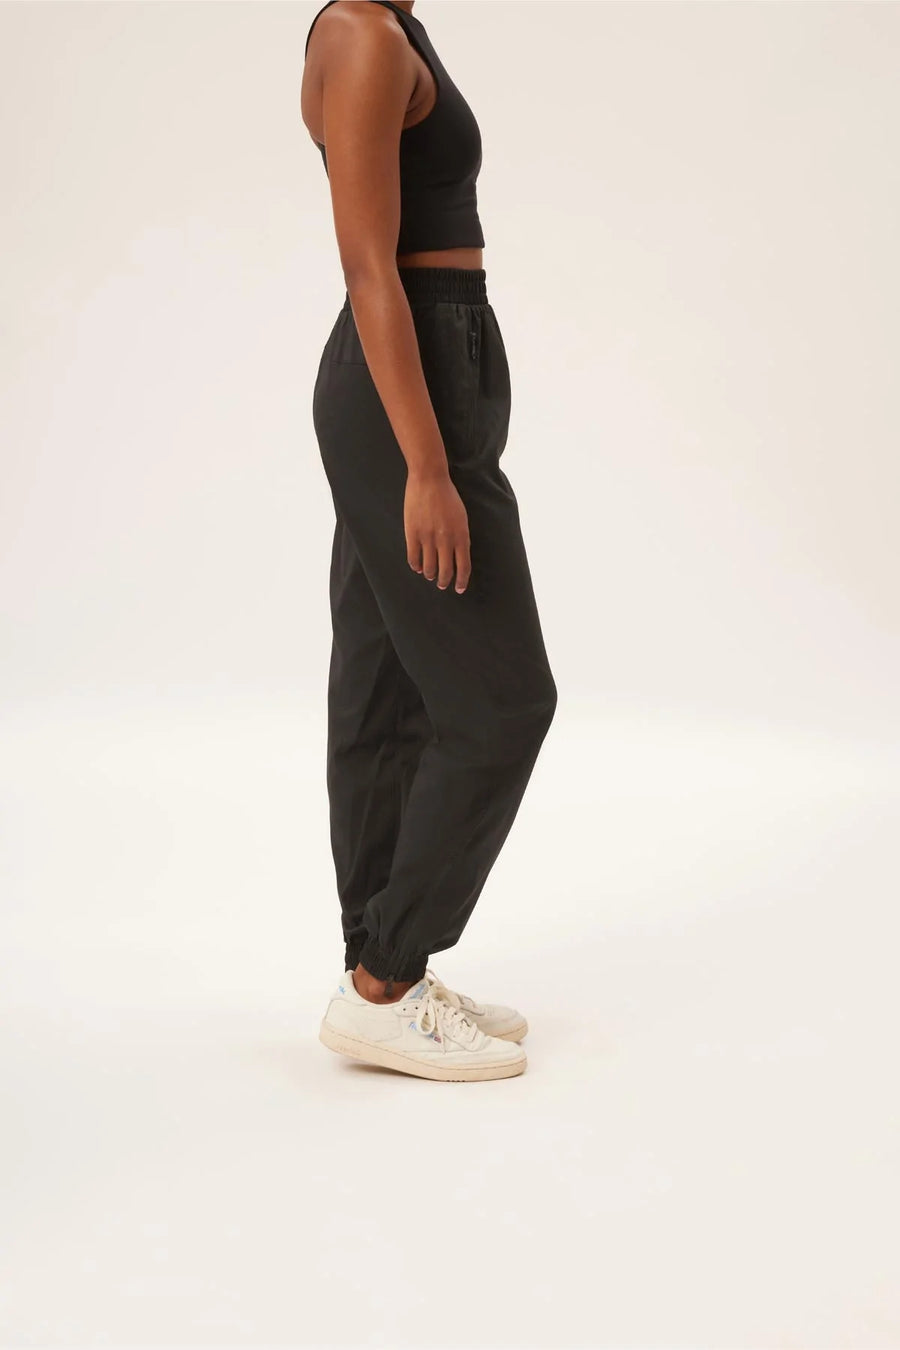 Summit recycled shell Track Pant, Girlfriend Collective